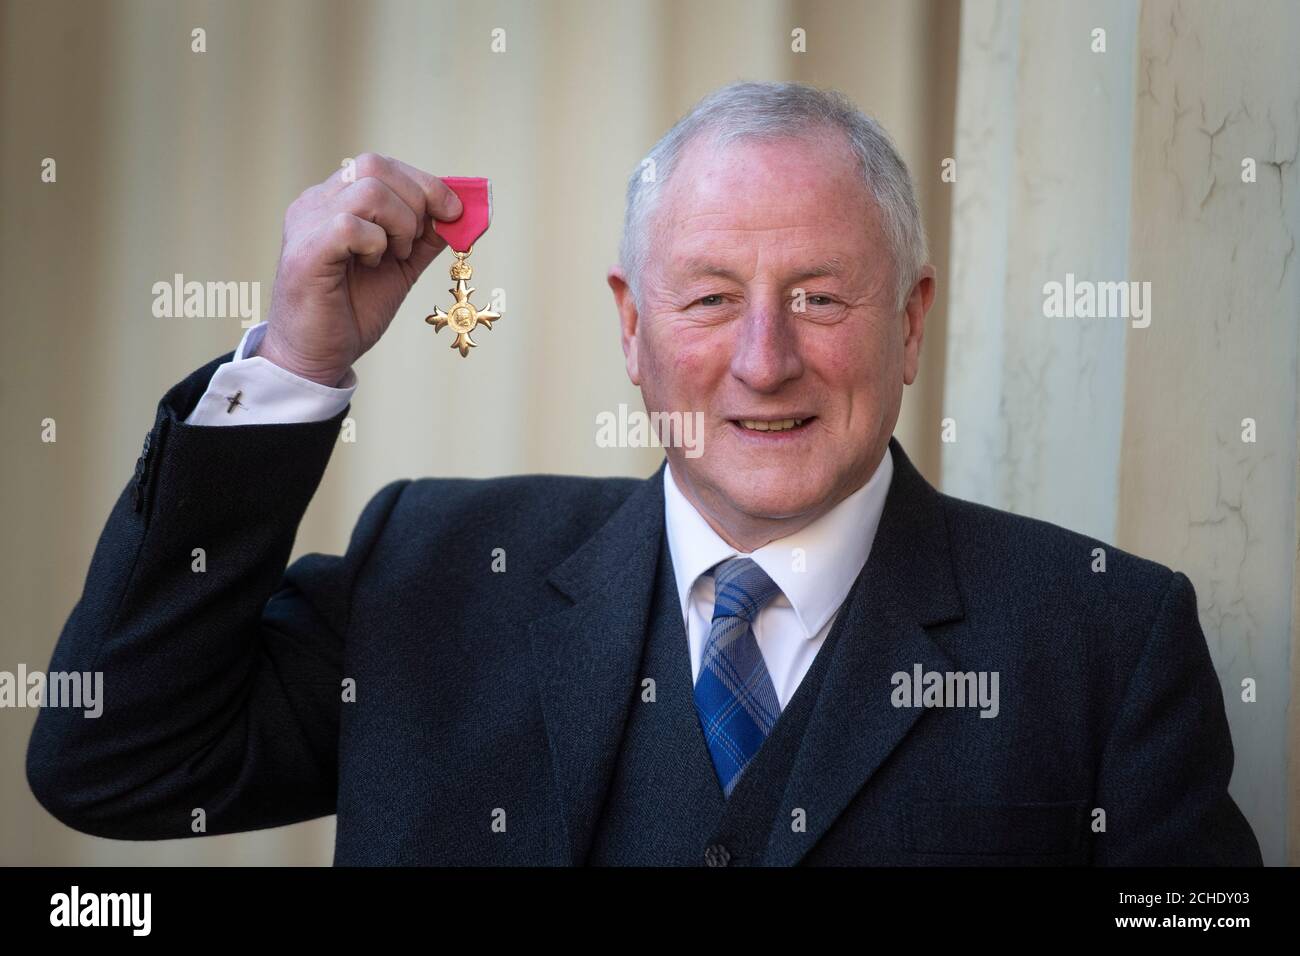 Robert Edwards with his OBE (Officer of the Order of the British Empire), which was presented at an investiture ceremony at Buckingham Palace, London. Stock Photo